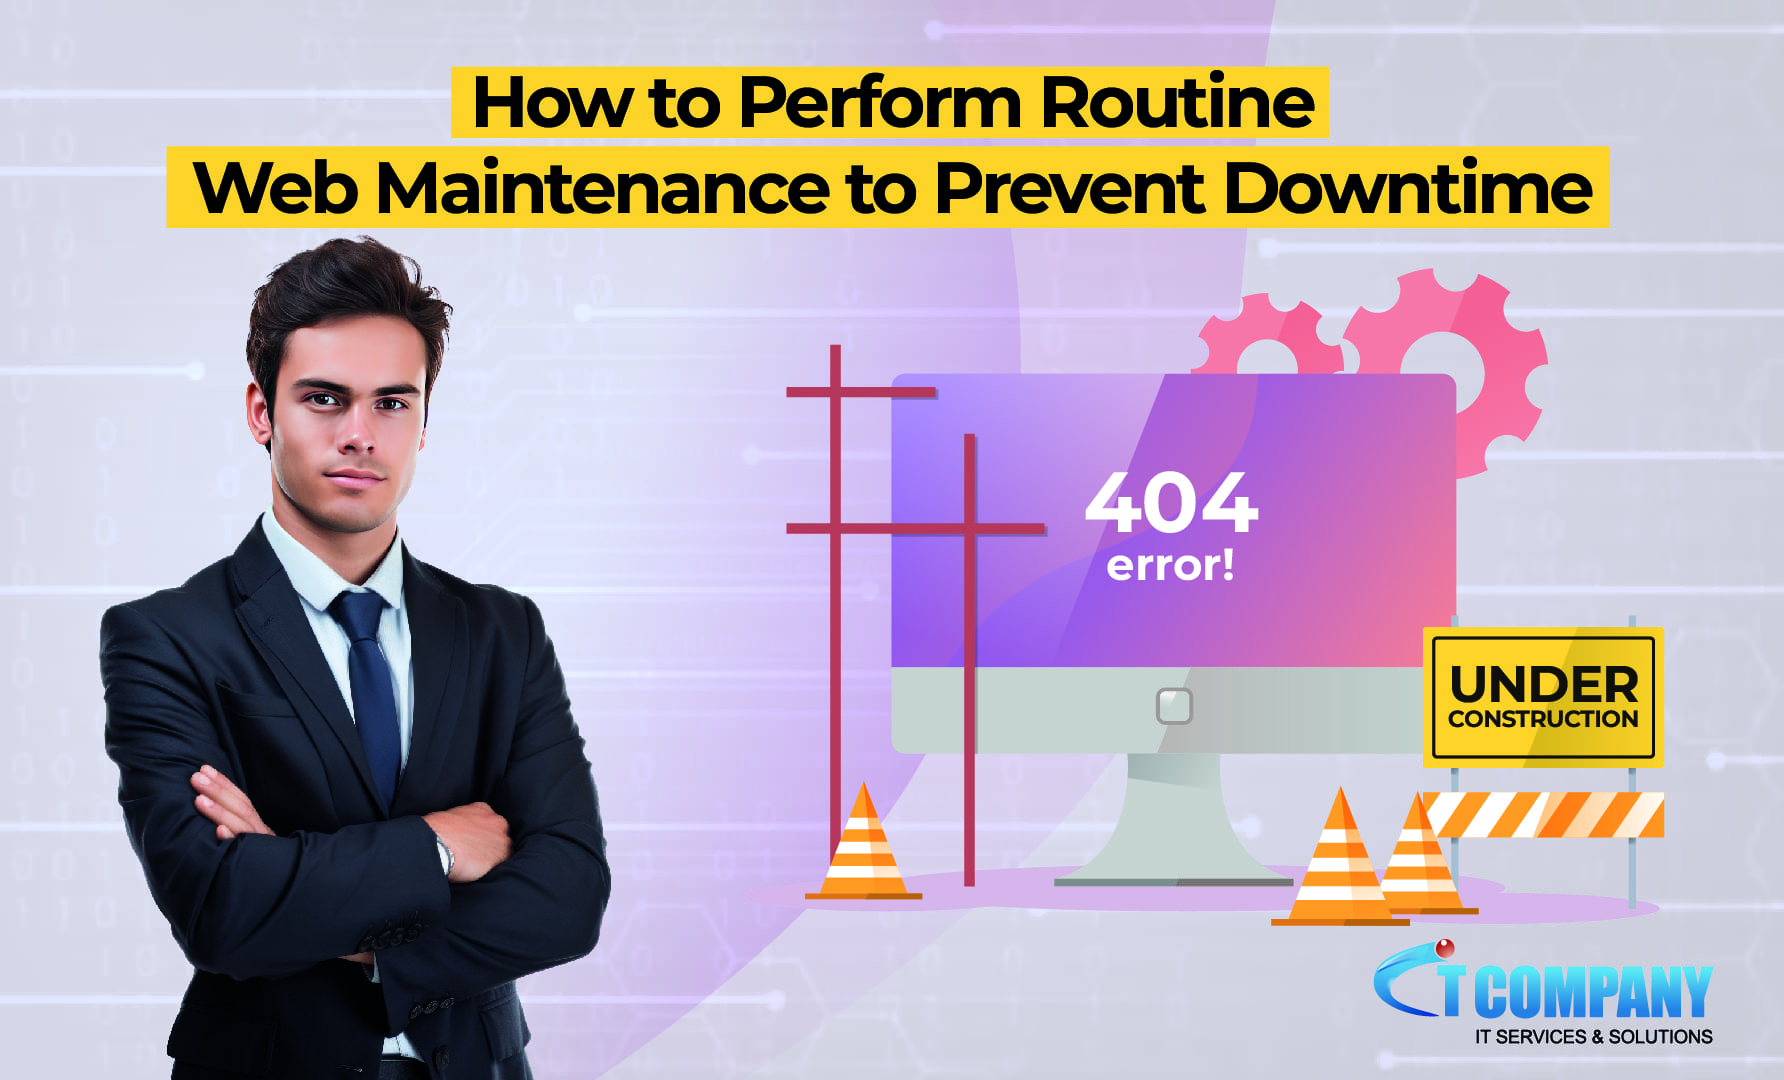 How to Perform Routine Web Maintenance to Prevent Downtime